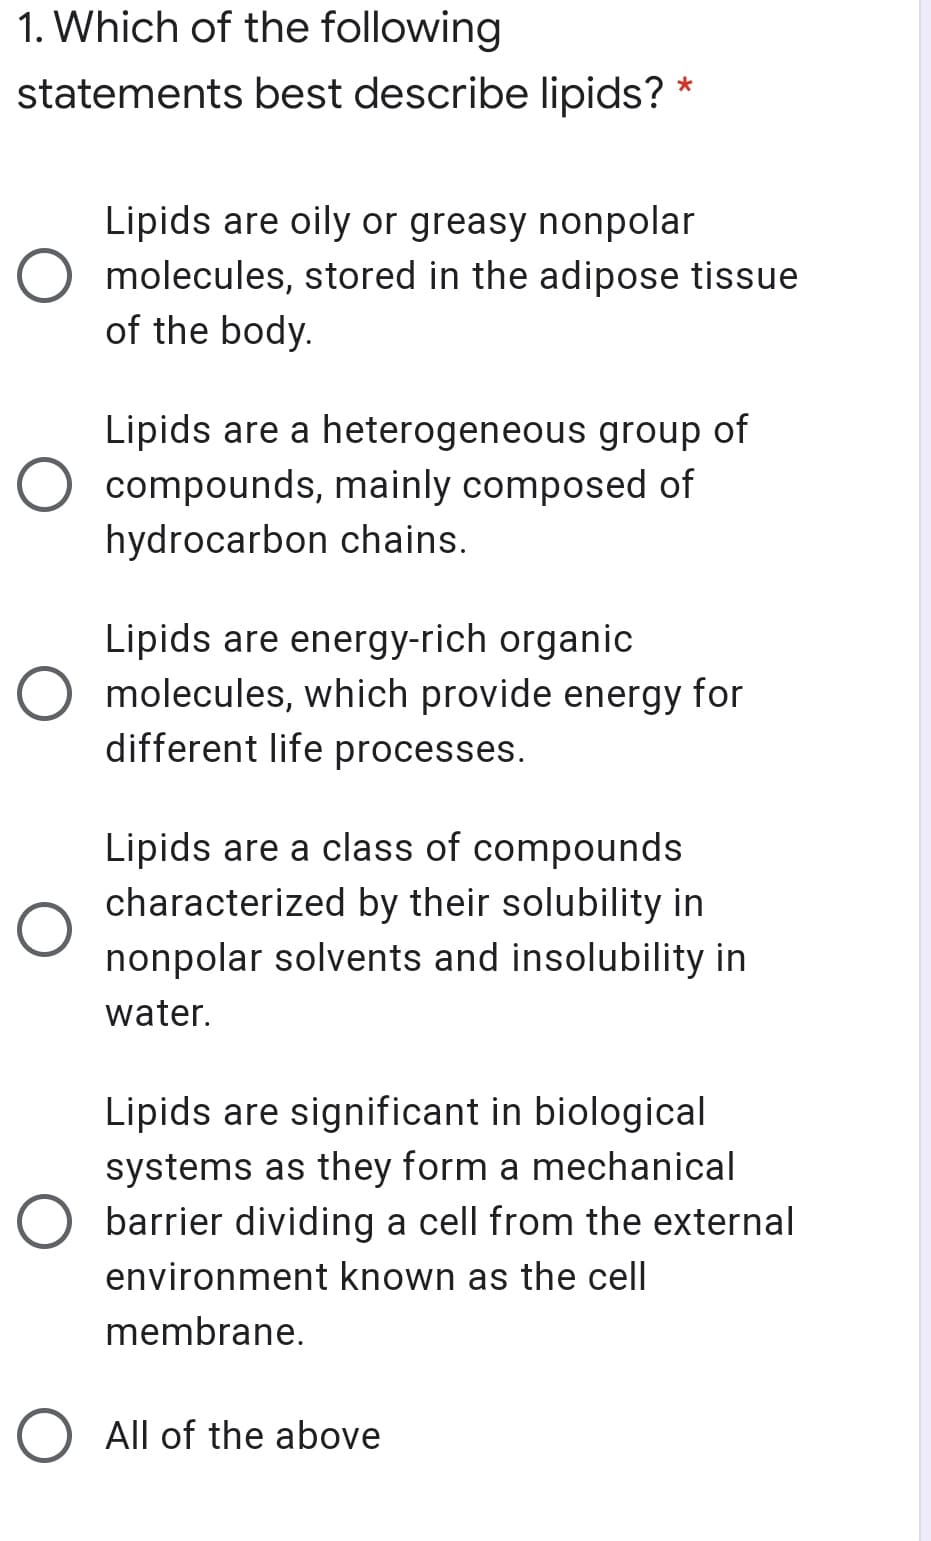 1. Which of the following
statements best describe lipids?
Lipids are oily or greasy nonpolar
O molecules, stored in the adipose tissue
of the body.
Lipids are a heterogeneous group of
O compounds, mainly composed of
hydrocarbon chains.
Lipids are energy-rich organic
O molecules, which provide energy for
different life processes.
Lipids are a class of compounds
characterized by their solubility in
nonpolar solvents and insolubility in
water.
Lipids are significant in biological
systems as they form a mechanical
O barrier dividing a cell from the external
environment known as the cell
membrane.
O All of the above
